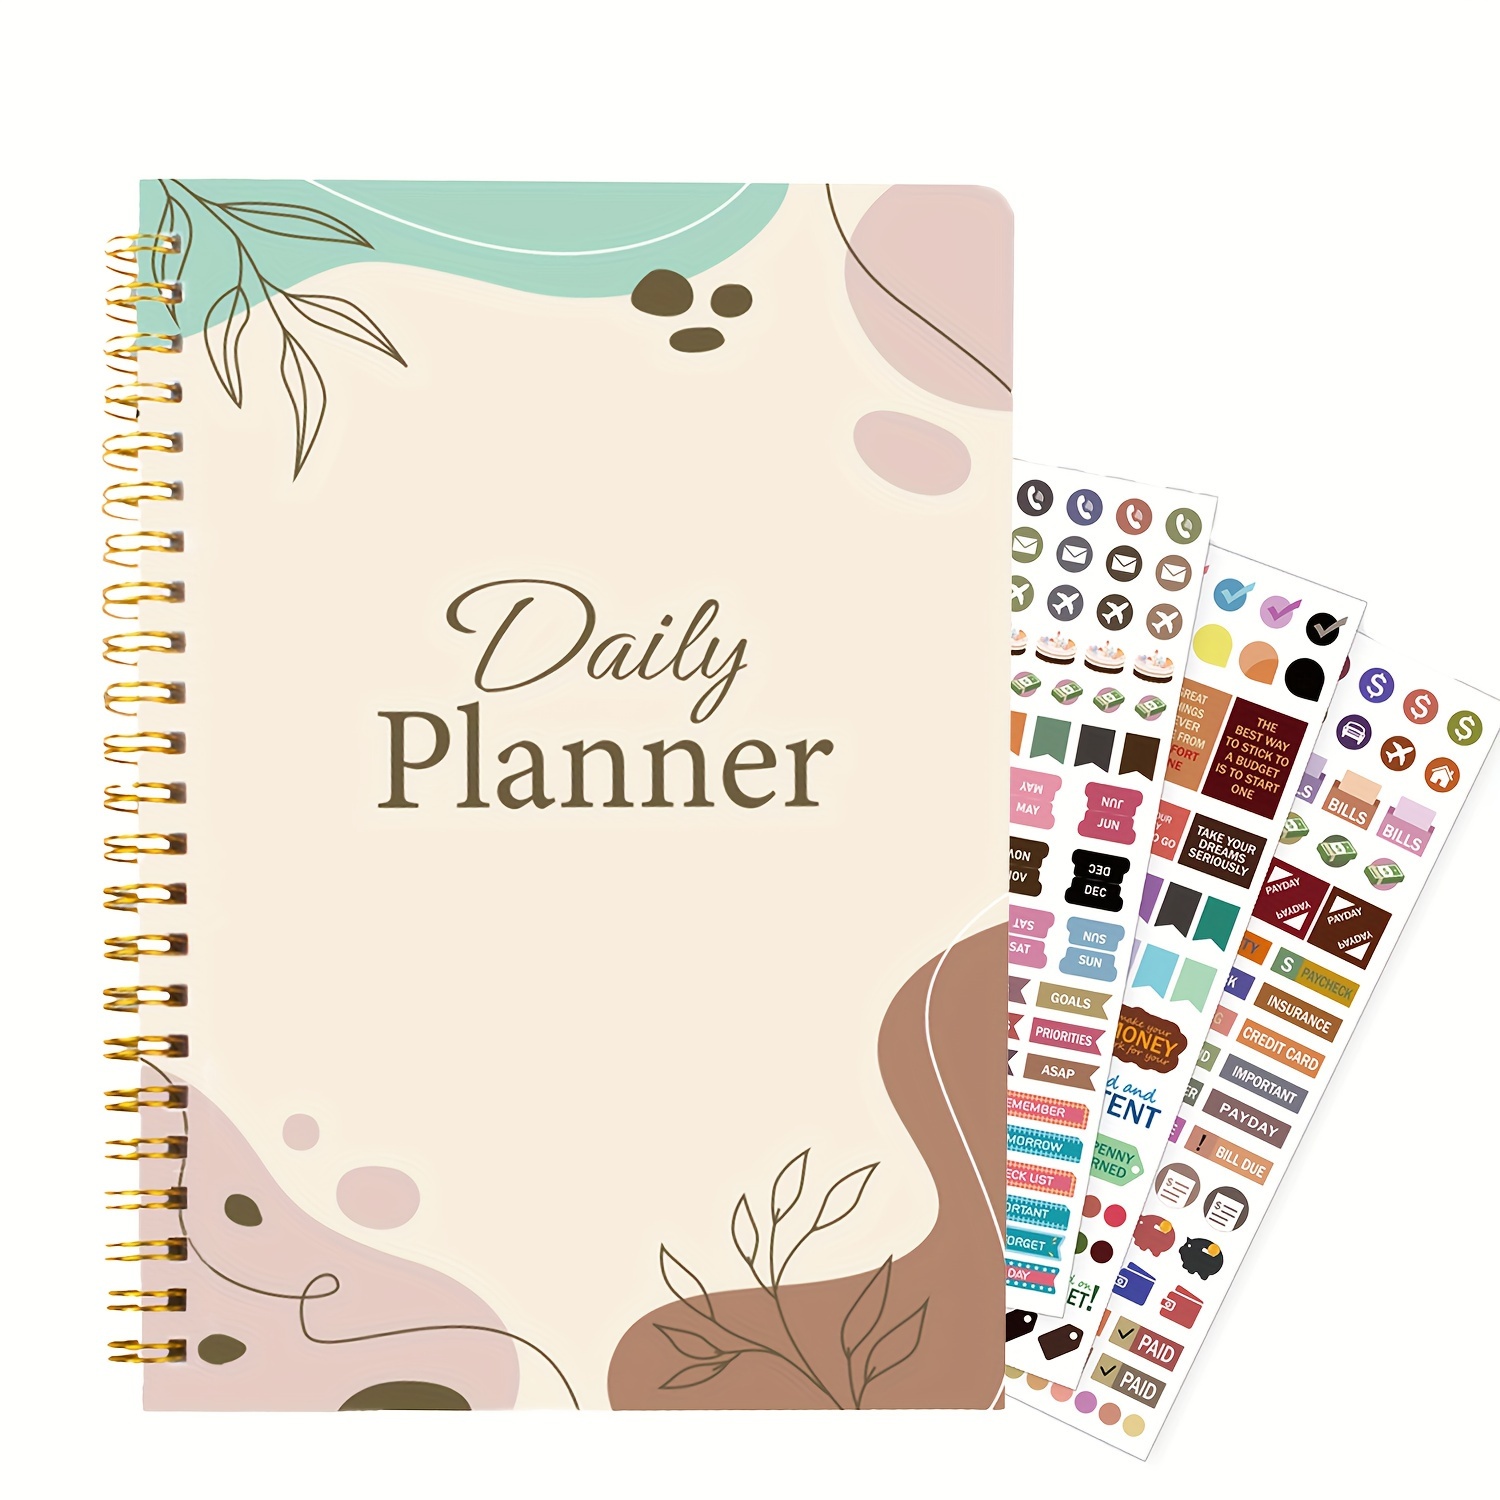 

Daily Planner With Mood And Water - A5 Undated Weekly Planner For Adults, English, 52 Sheets, 8 X 5.7 Inches, Includes 3 Stickers